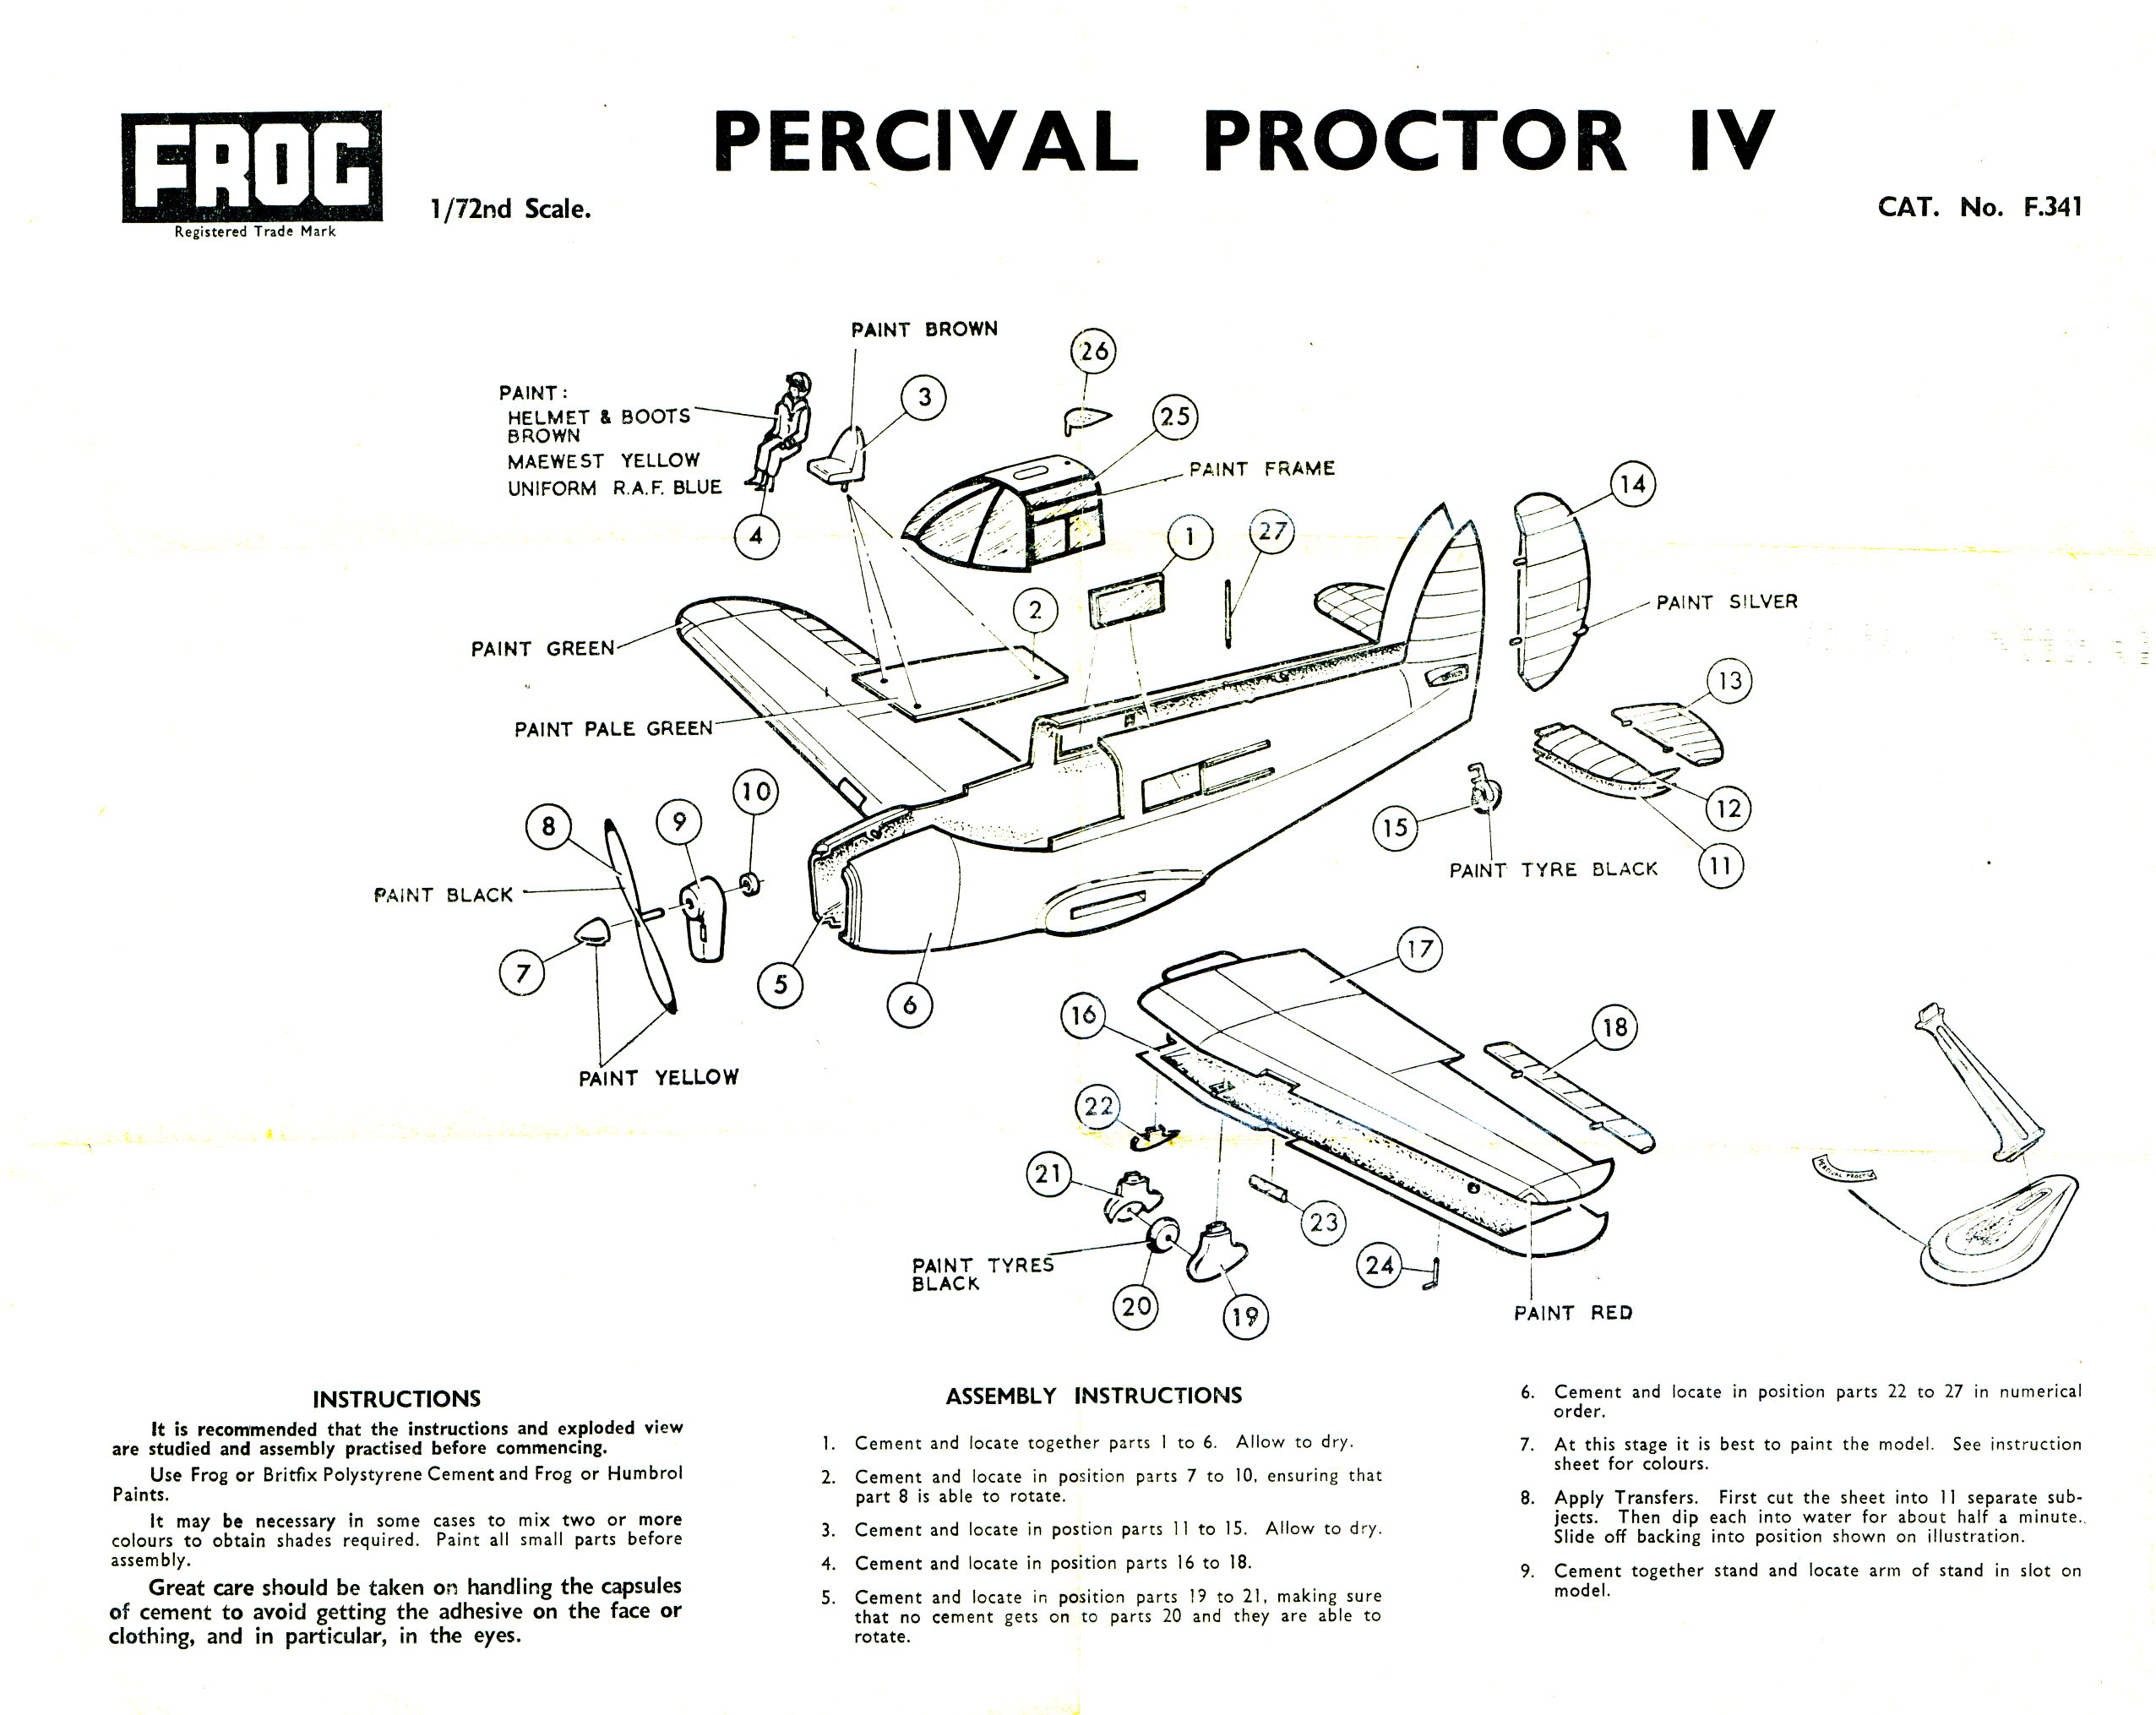 FROG F341 Percival Proctor IV Trainer, Black series with Gold Tokens, IMA Ltd 1965, assembly instructions